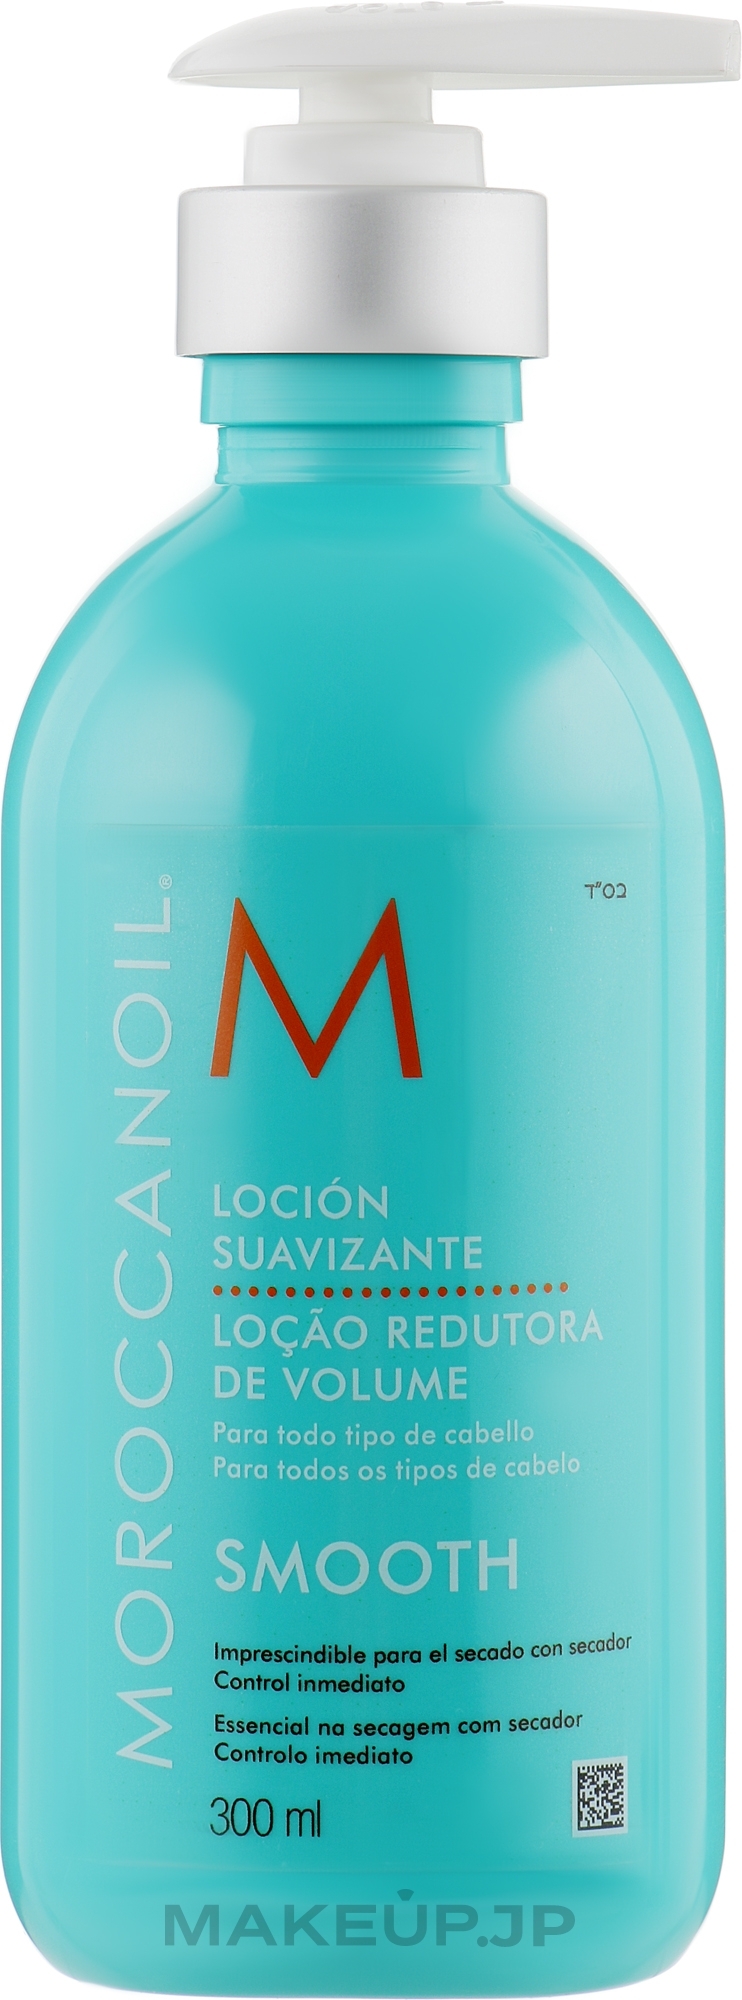 Softening Smoothing Hair Lotion - Moroccanoil Smoothing Hair Lotion — photo 300 ml